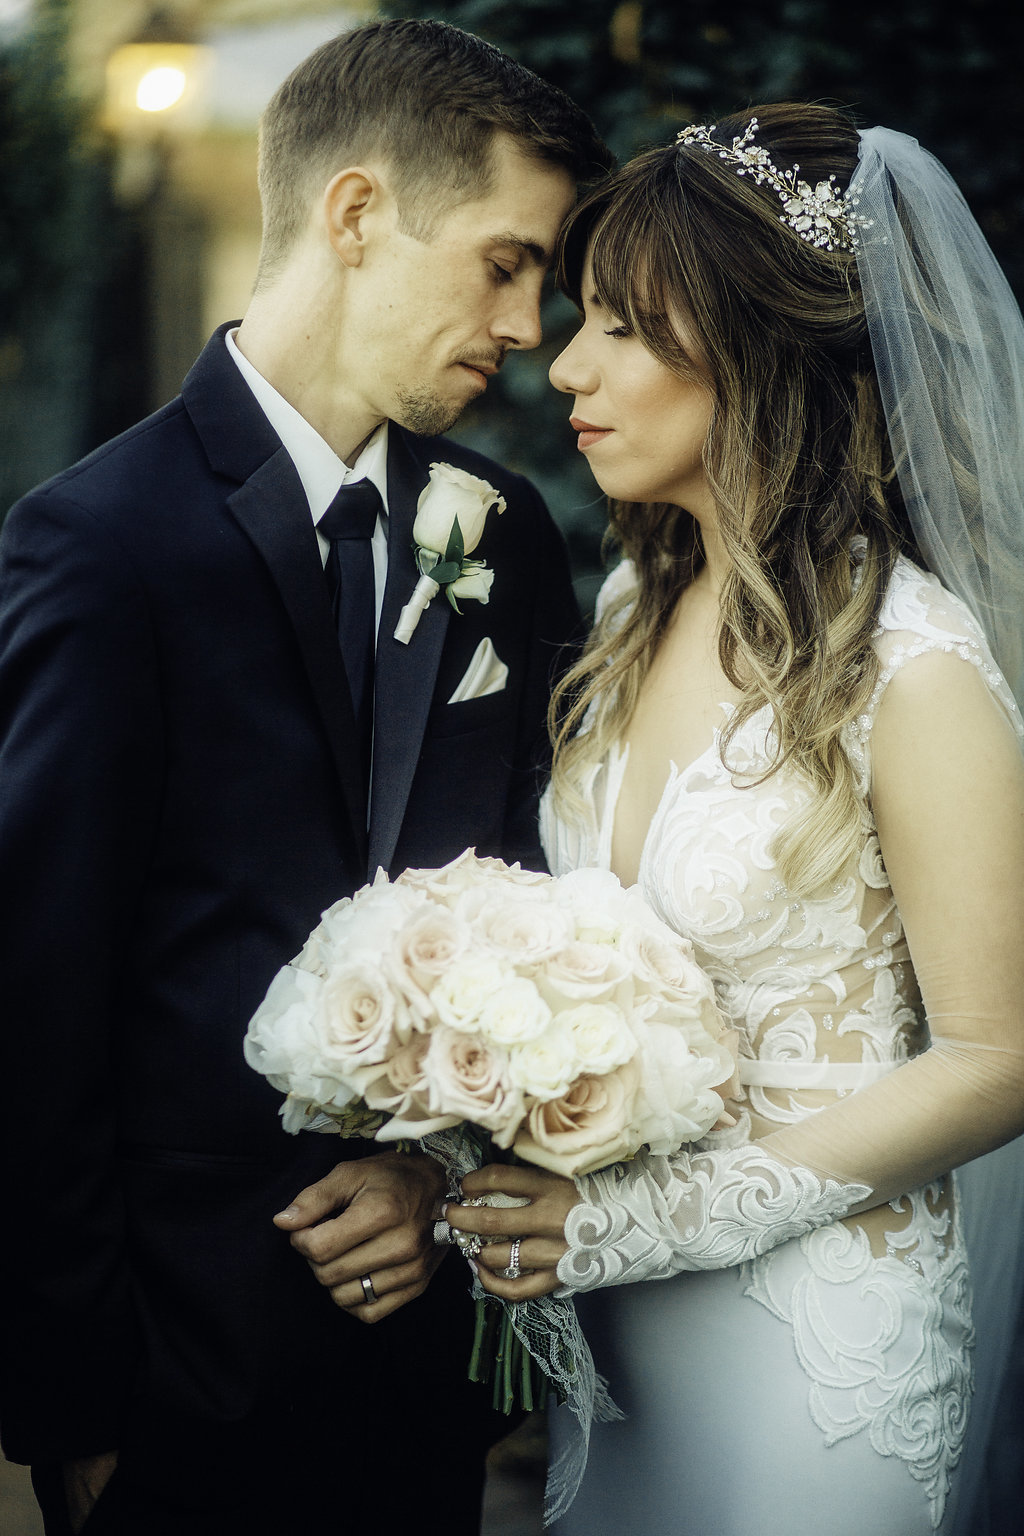 Wedding Photograph Of Bride Carrying a  Bouquet Next To Her Groom With Their Eyes Closed Los Angeles